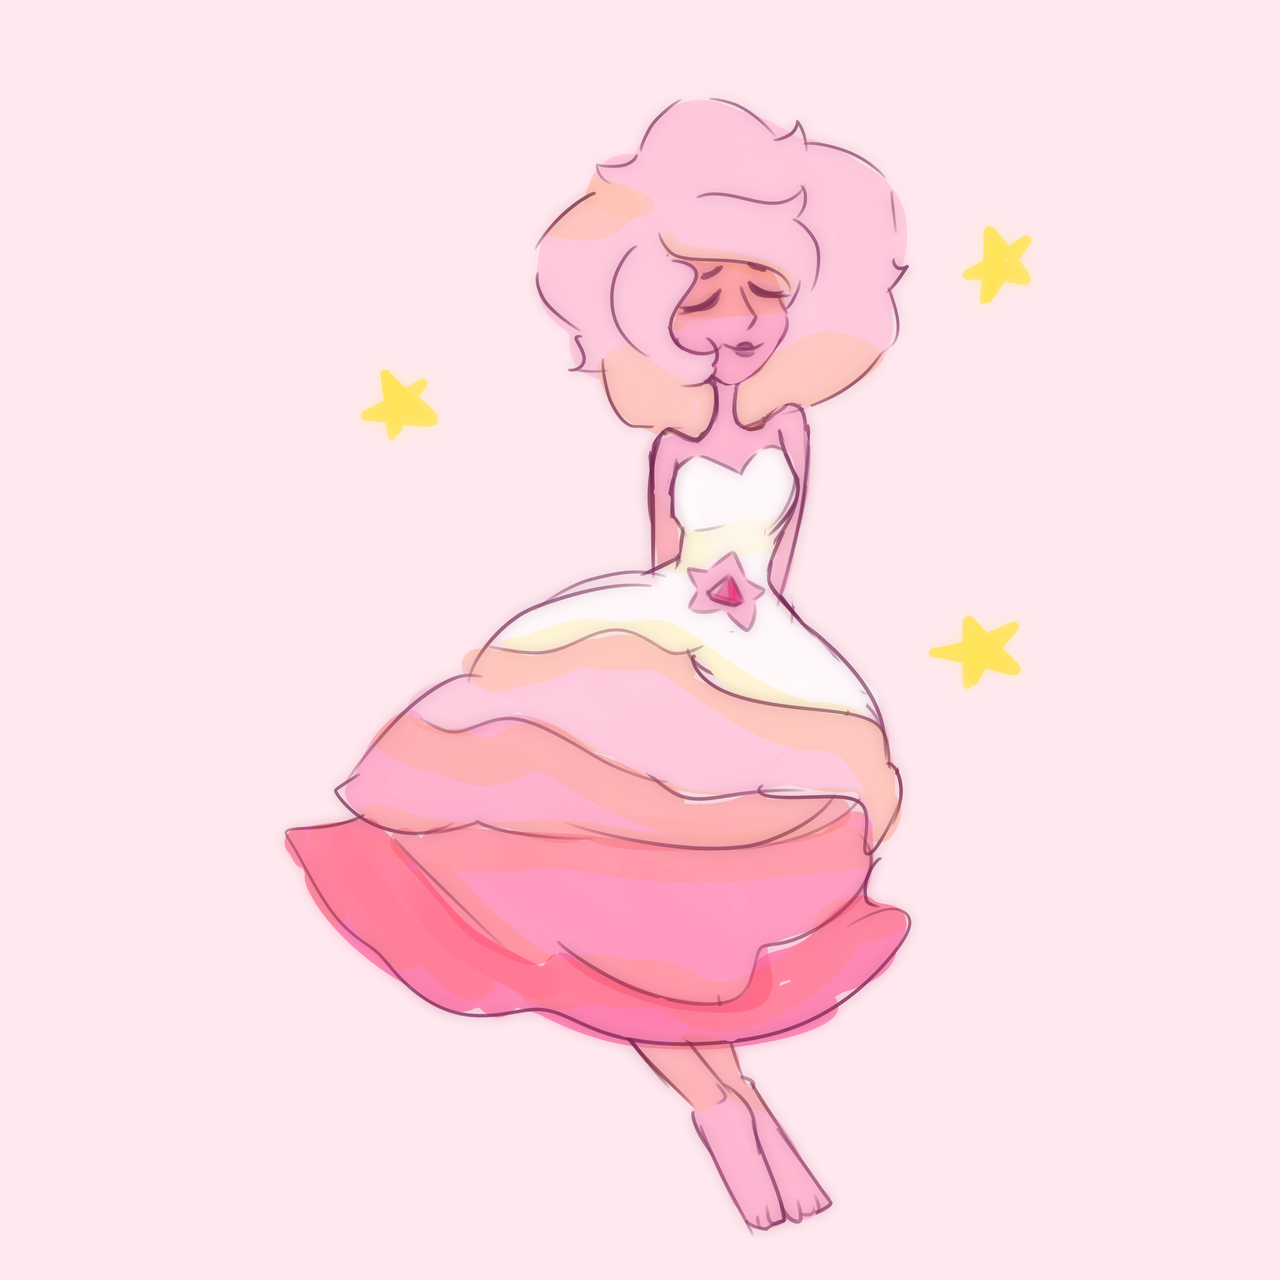 pink D as a warm up sketch